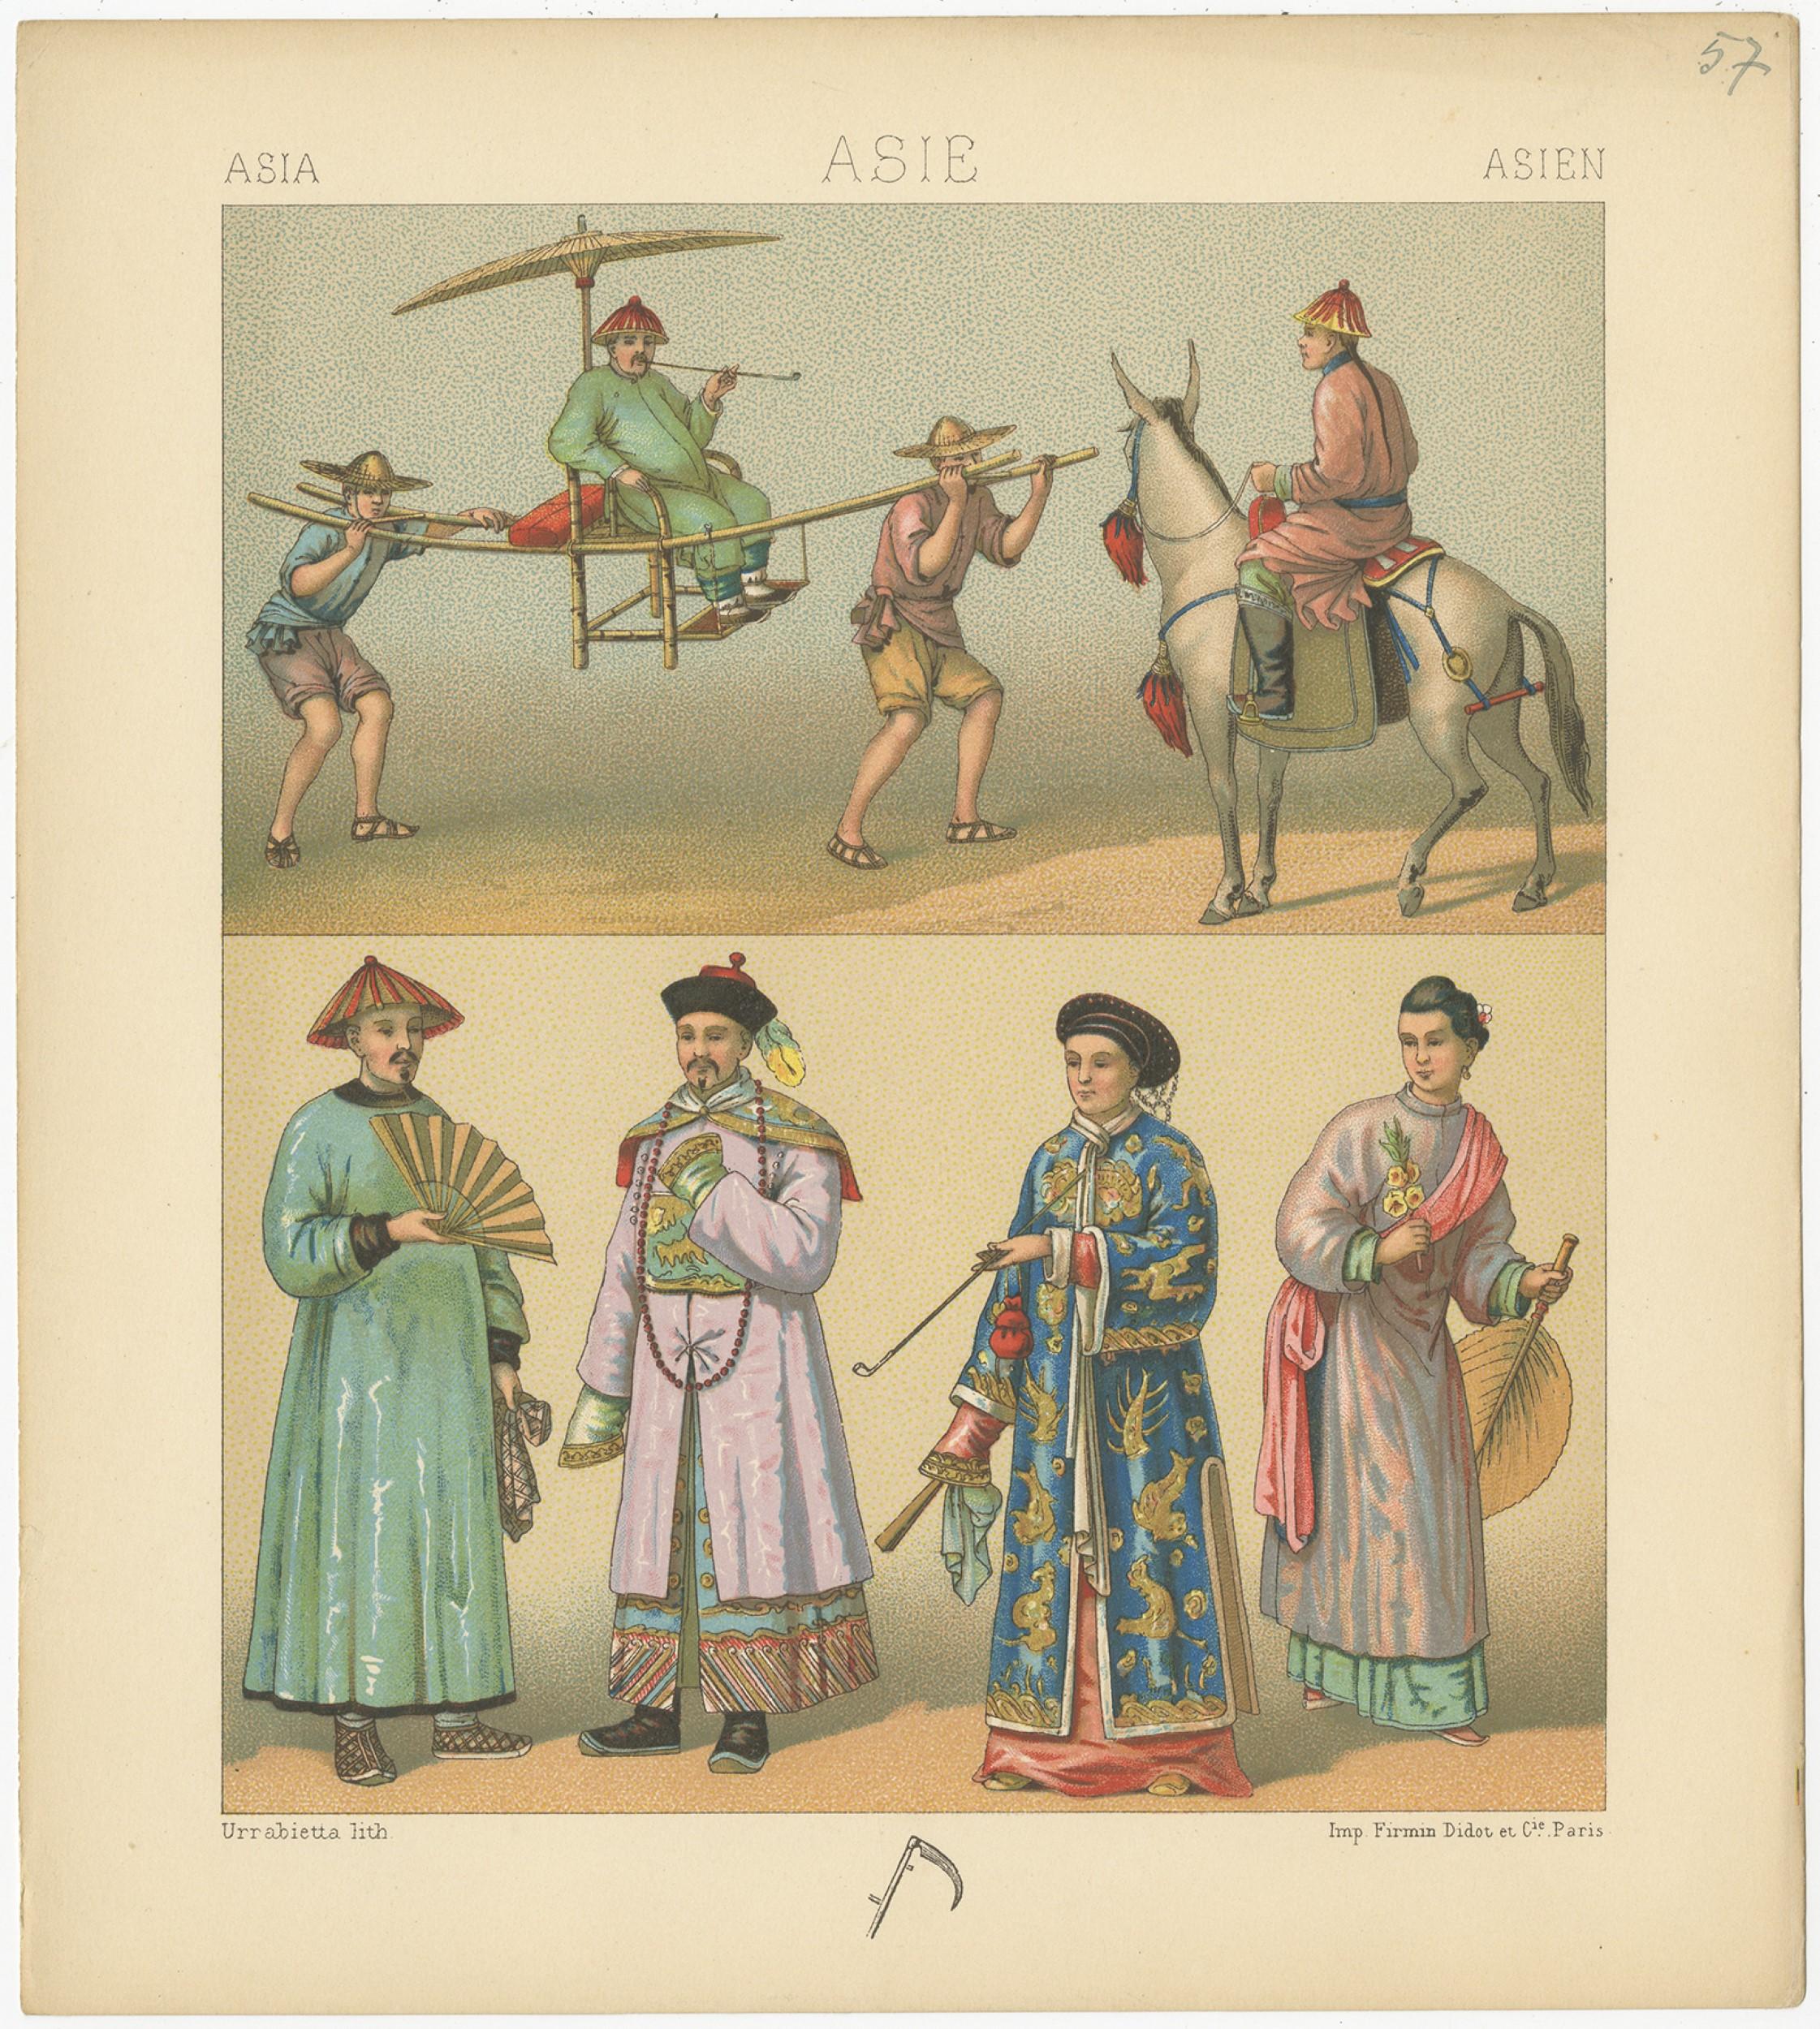 Antique print titled 'Asia - Asie - Asien'. Chromolithograph of Asian Costumes. This print originates from 'Le Costume Historique' by M.A. Racinet. Published, circa 1880.